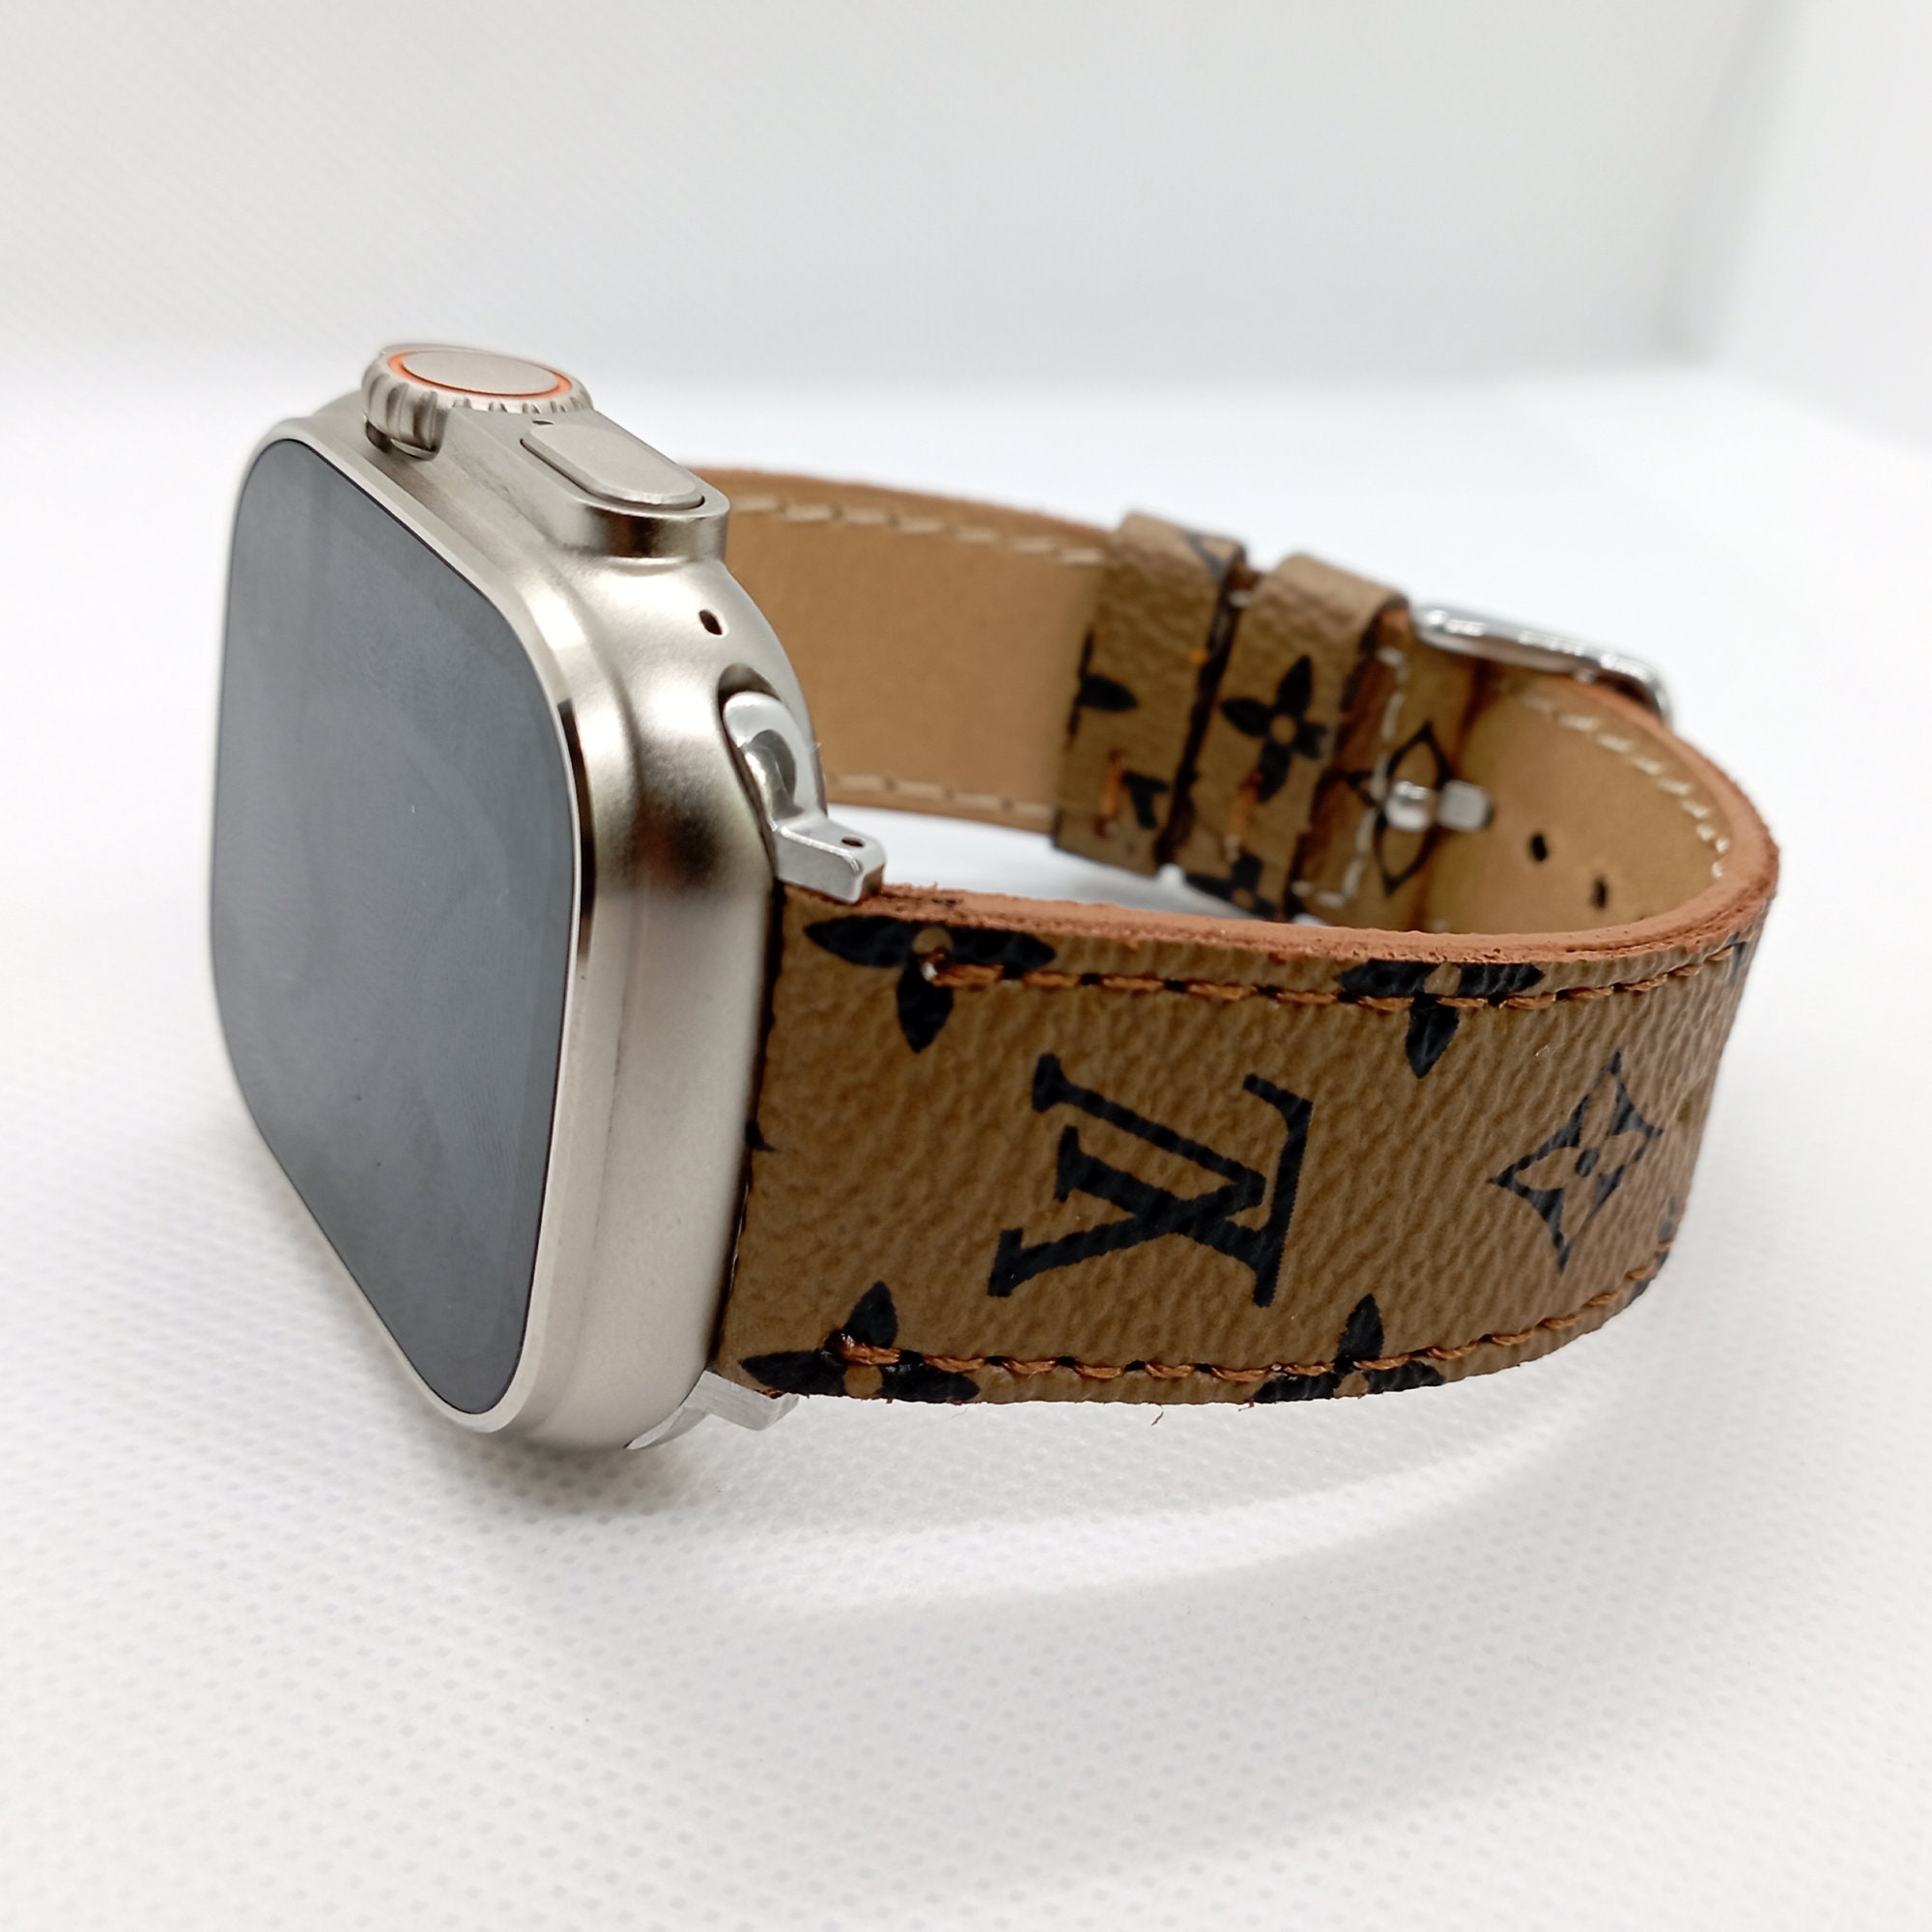 lv watch band for apple watch leatherman